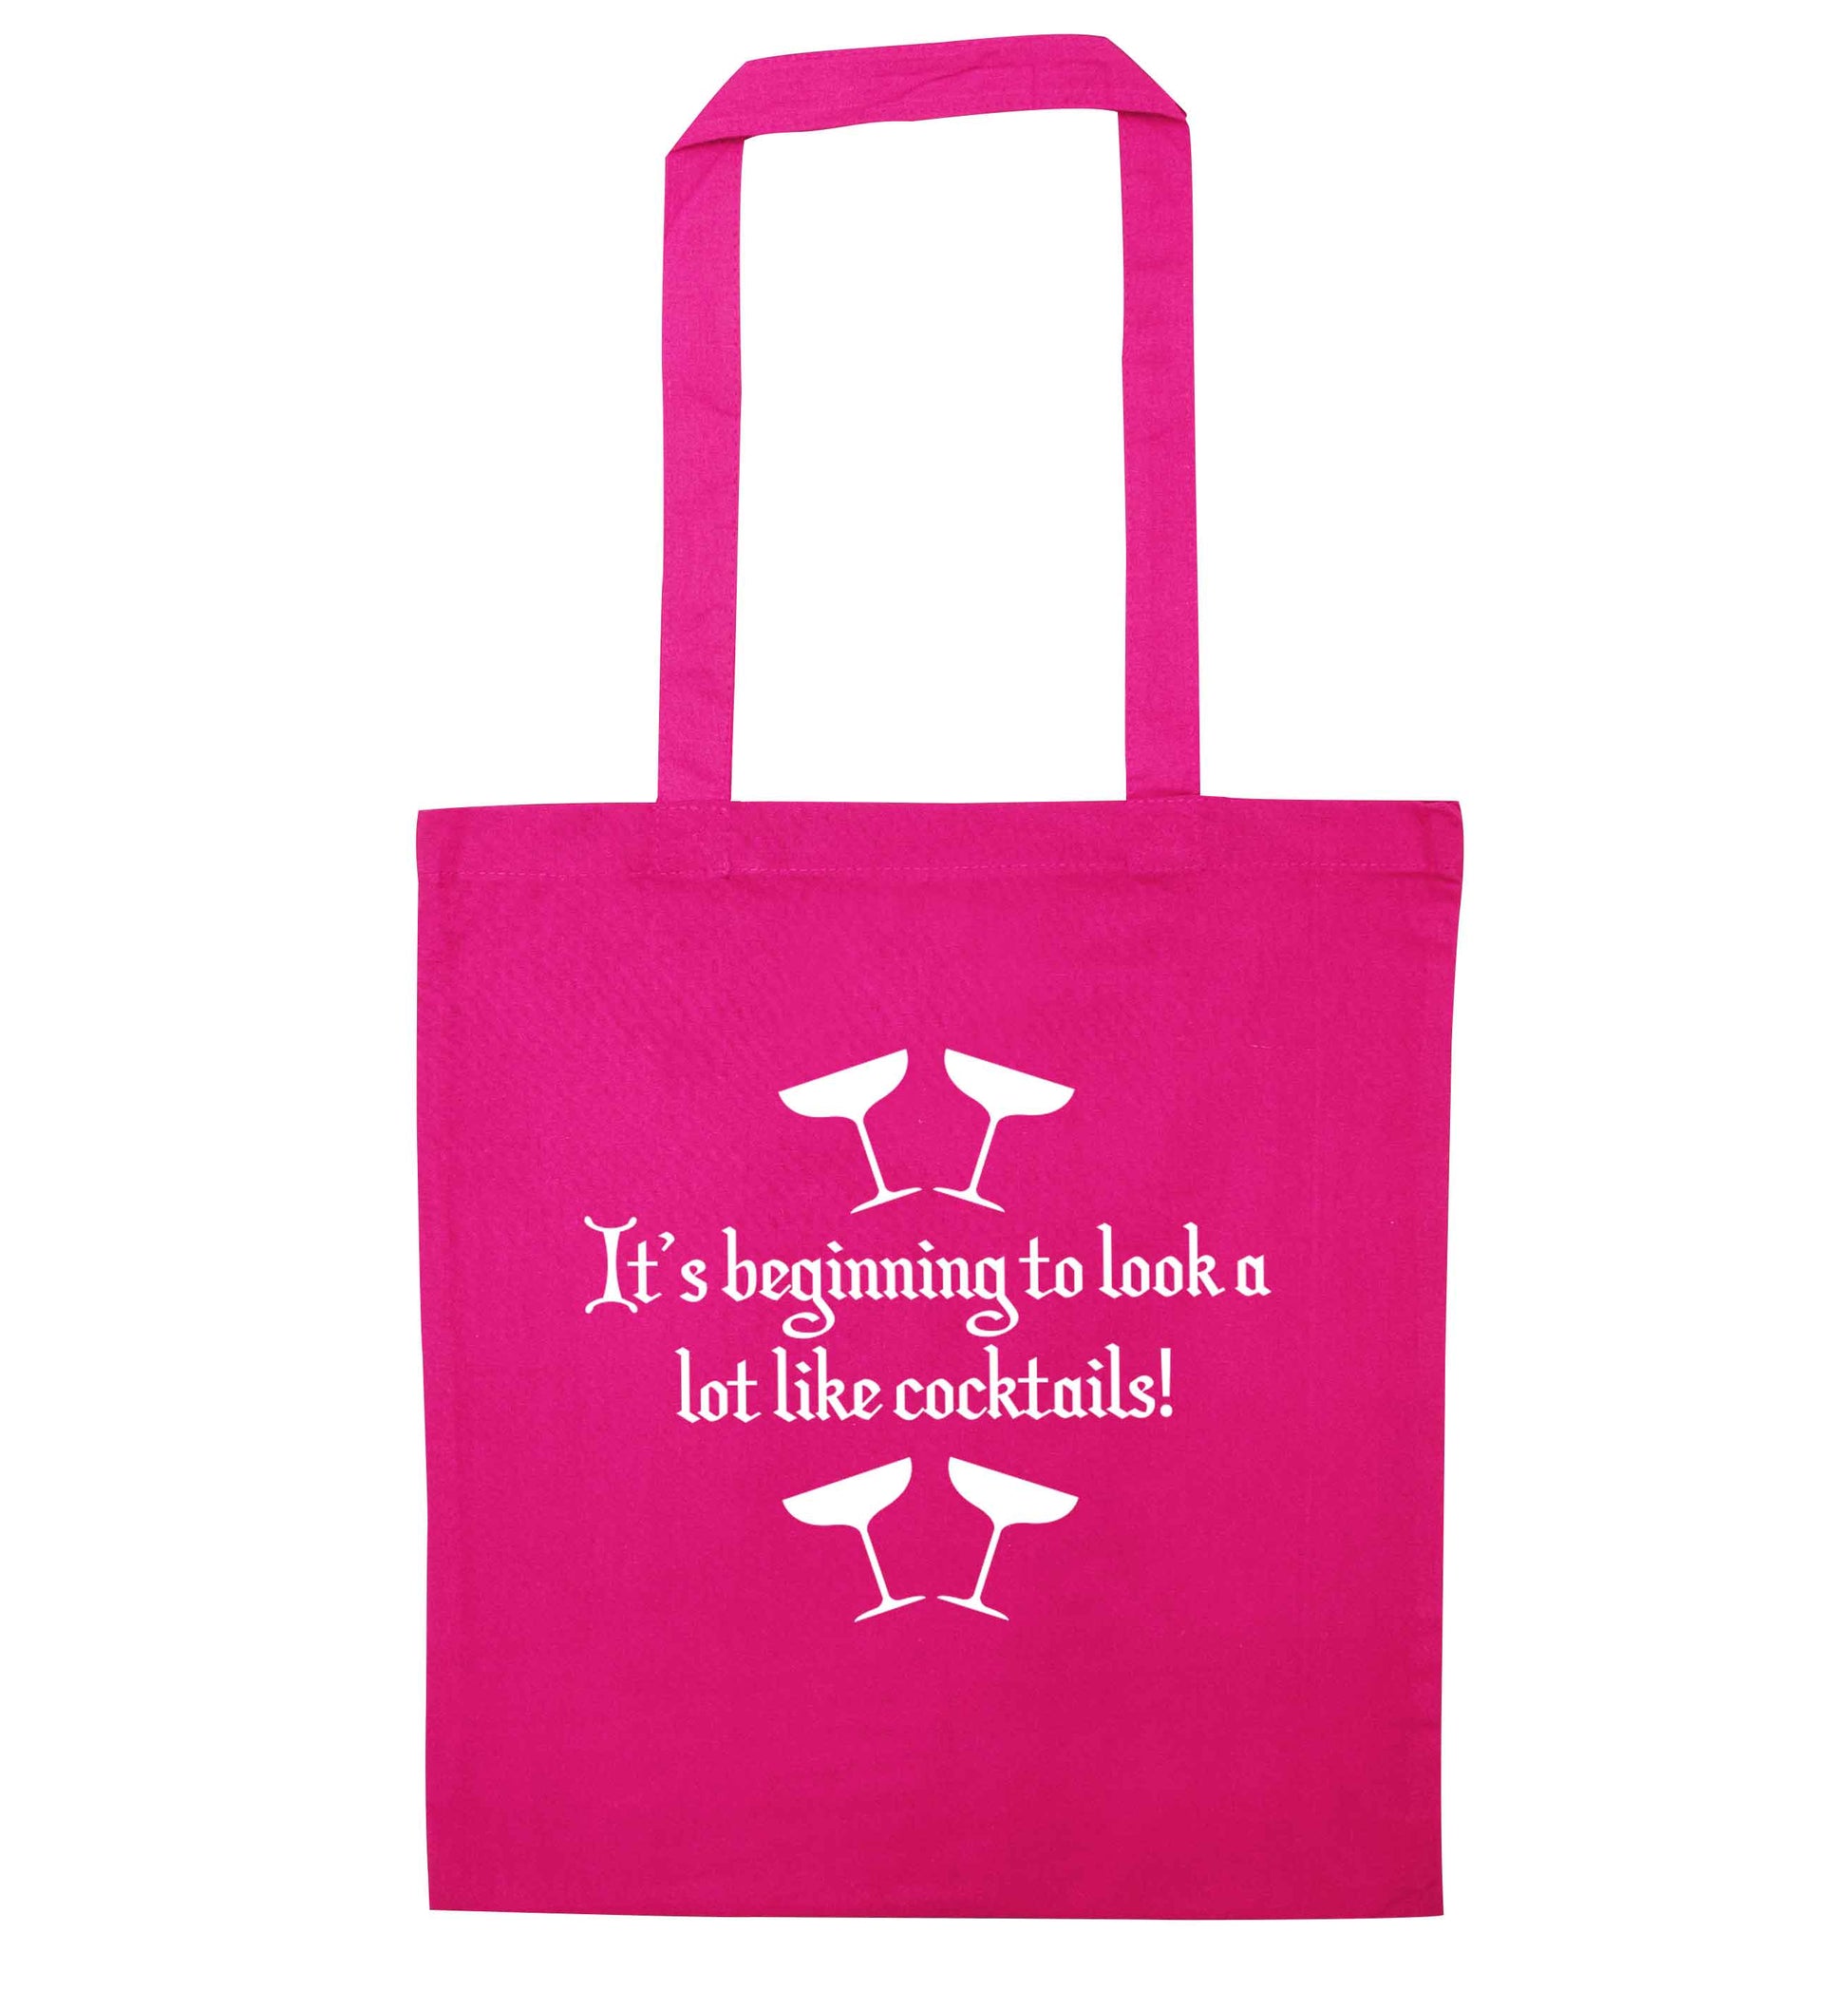 It's beginning to look a lot like cocktails pink tote bag